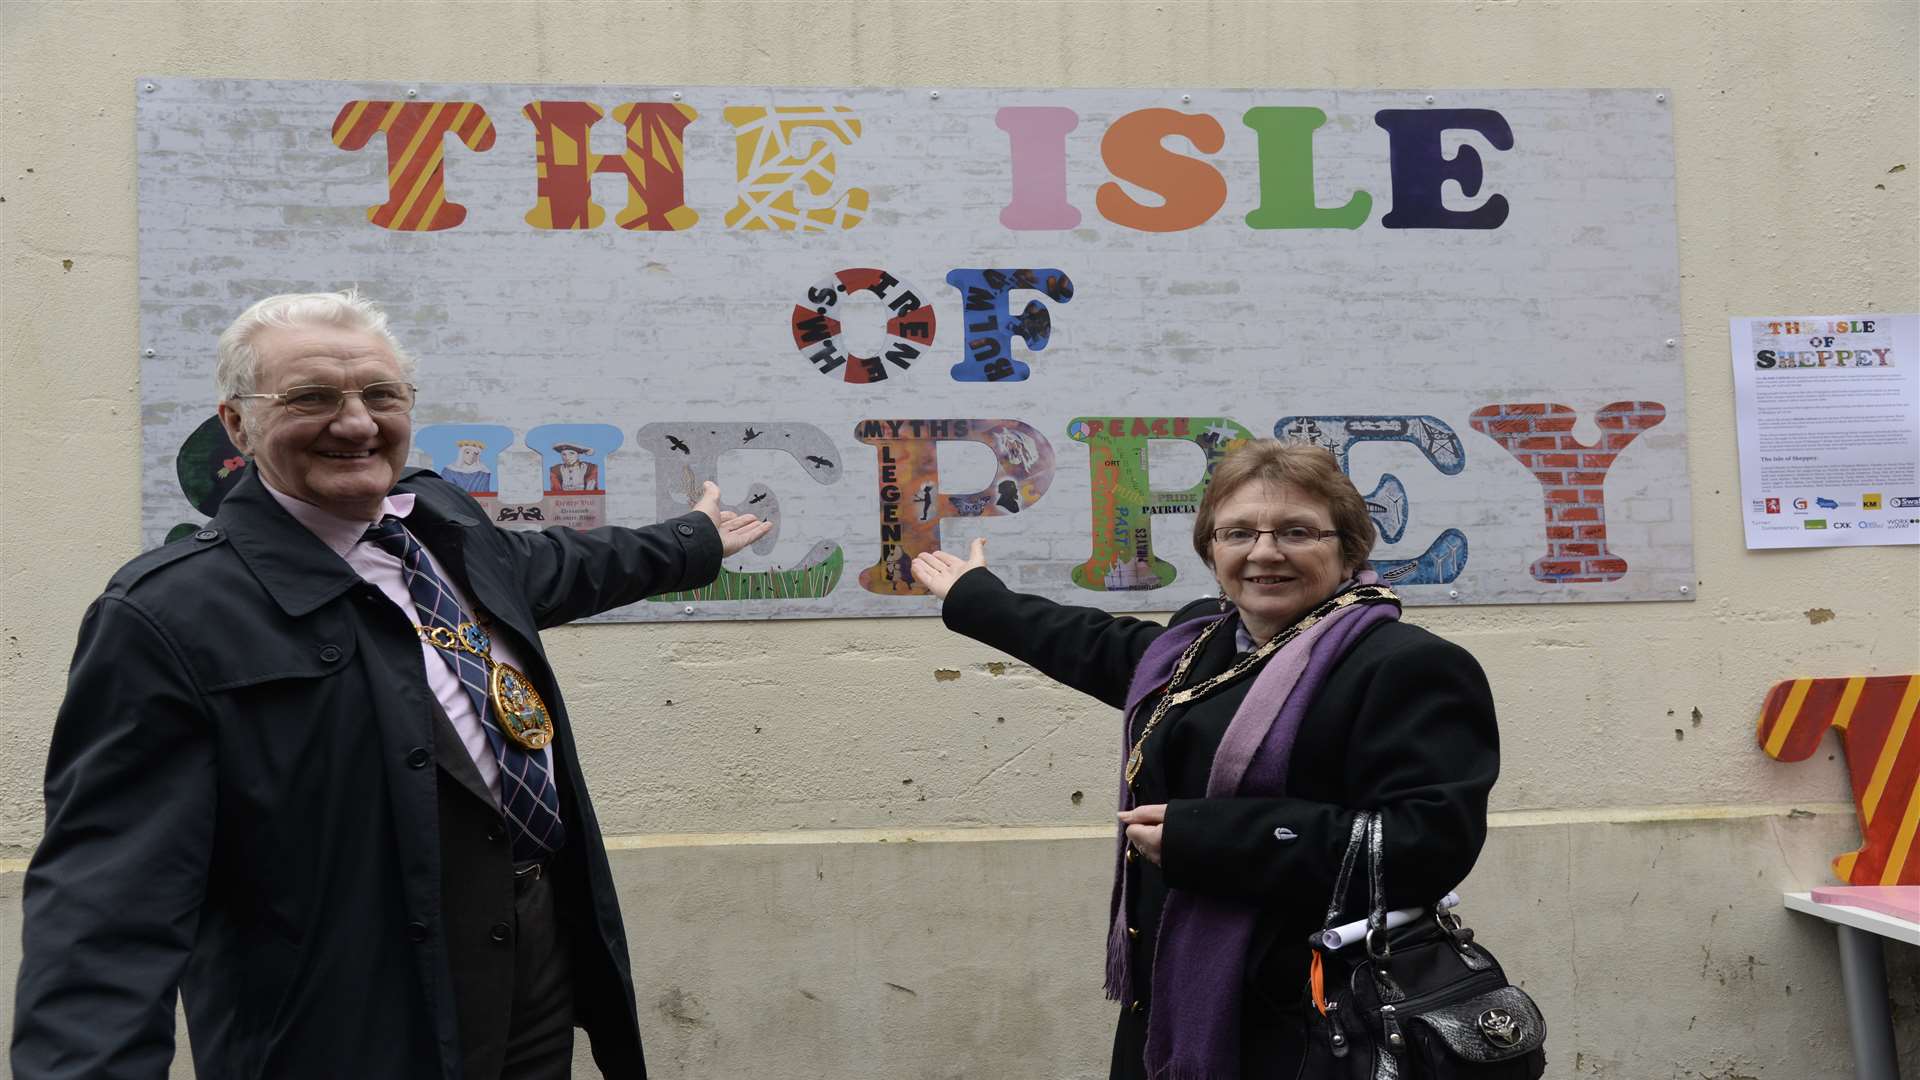 Mayor of Swale Cllr George Bobbin and Mayoress Mrs Brenda Bobbin unveil the Blank Canvas project